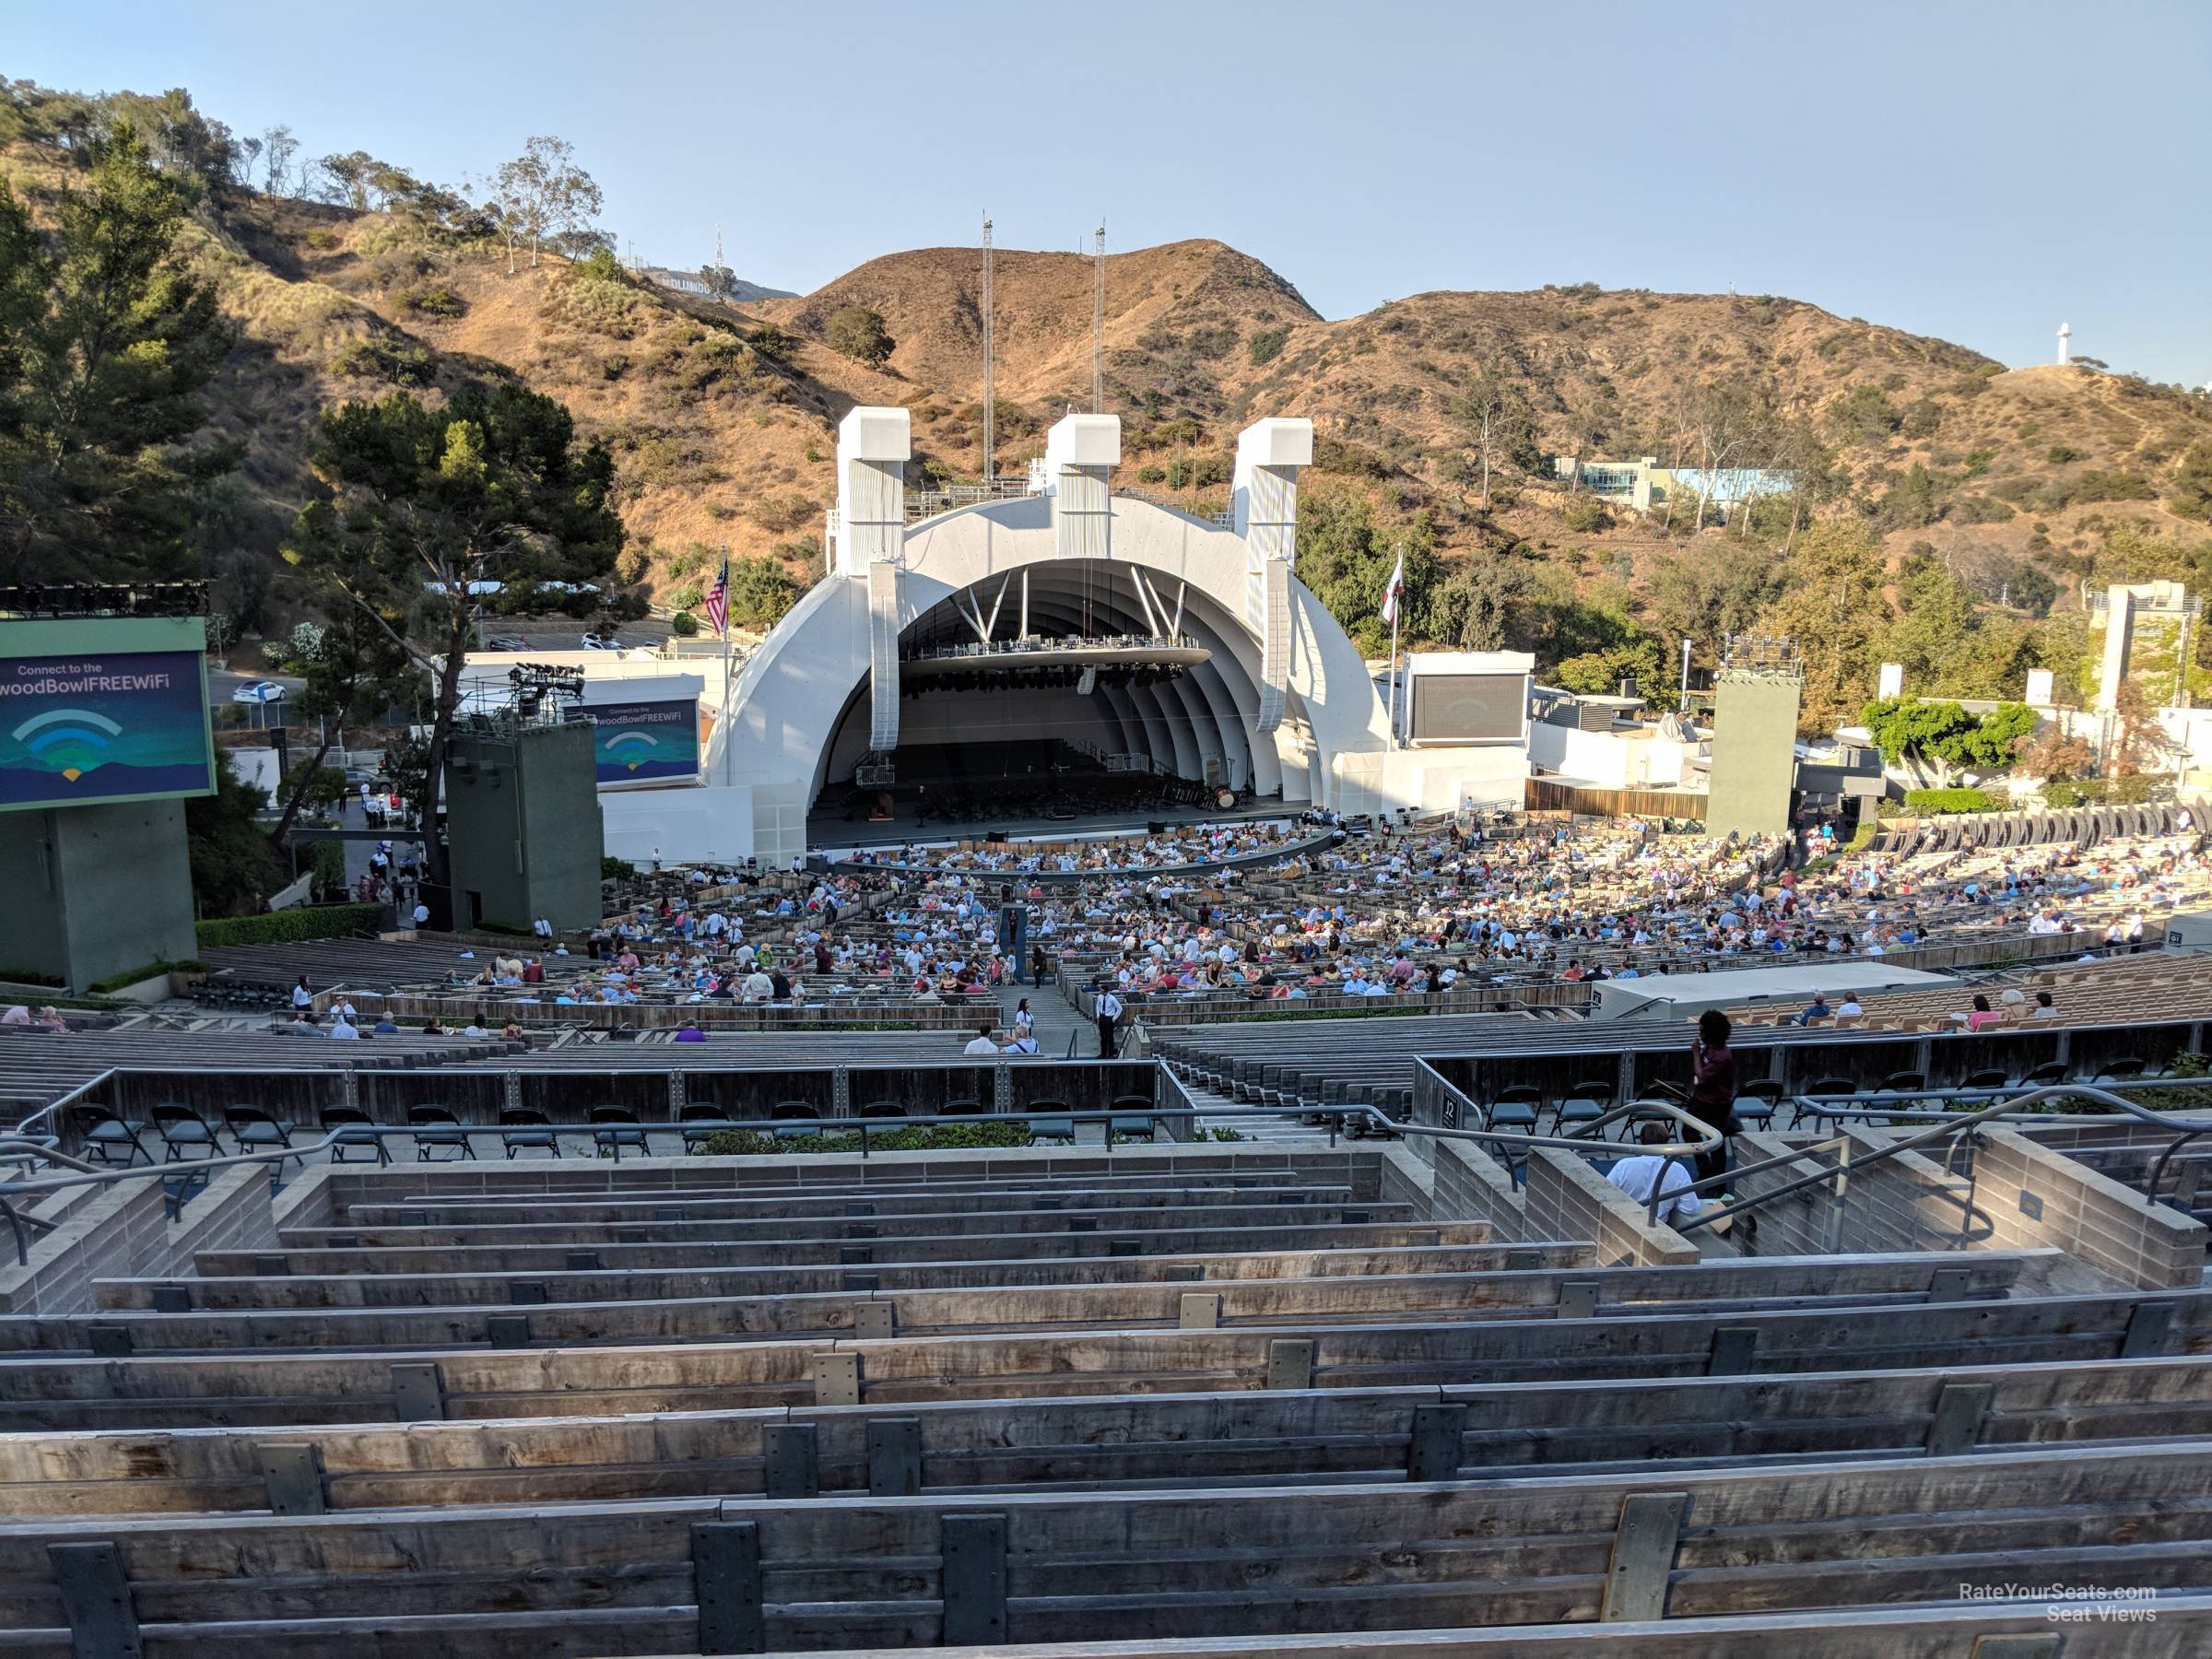 section p1, row 14 seat view  - hollywood bowl